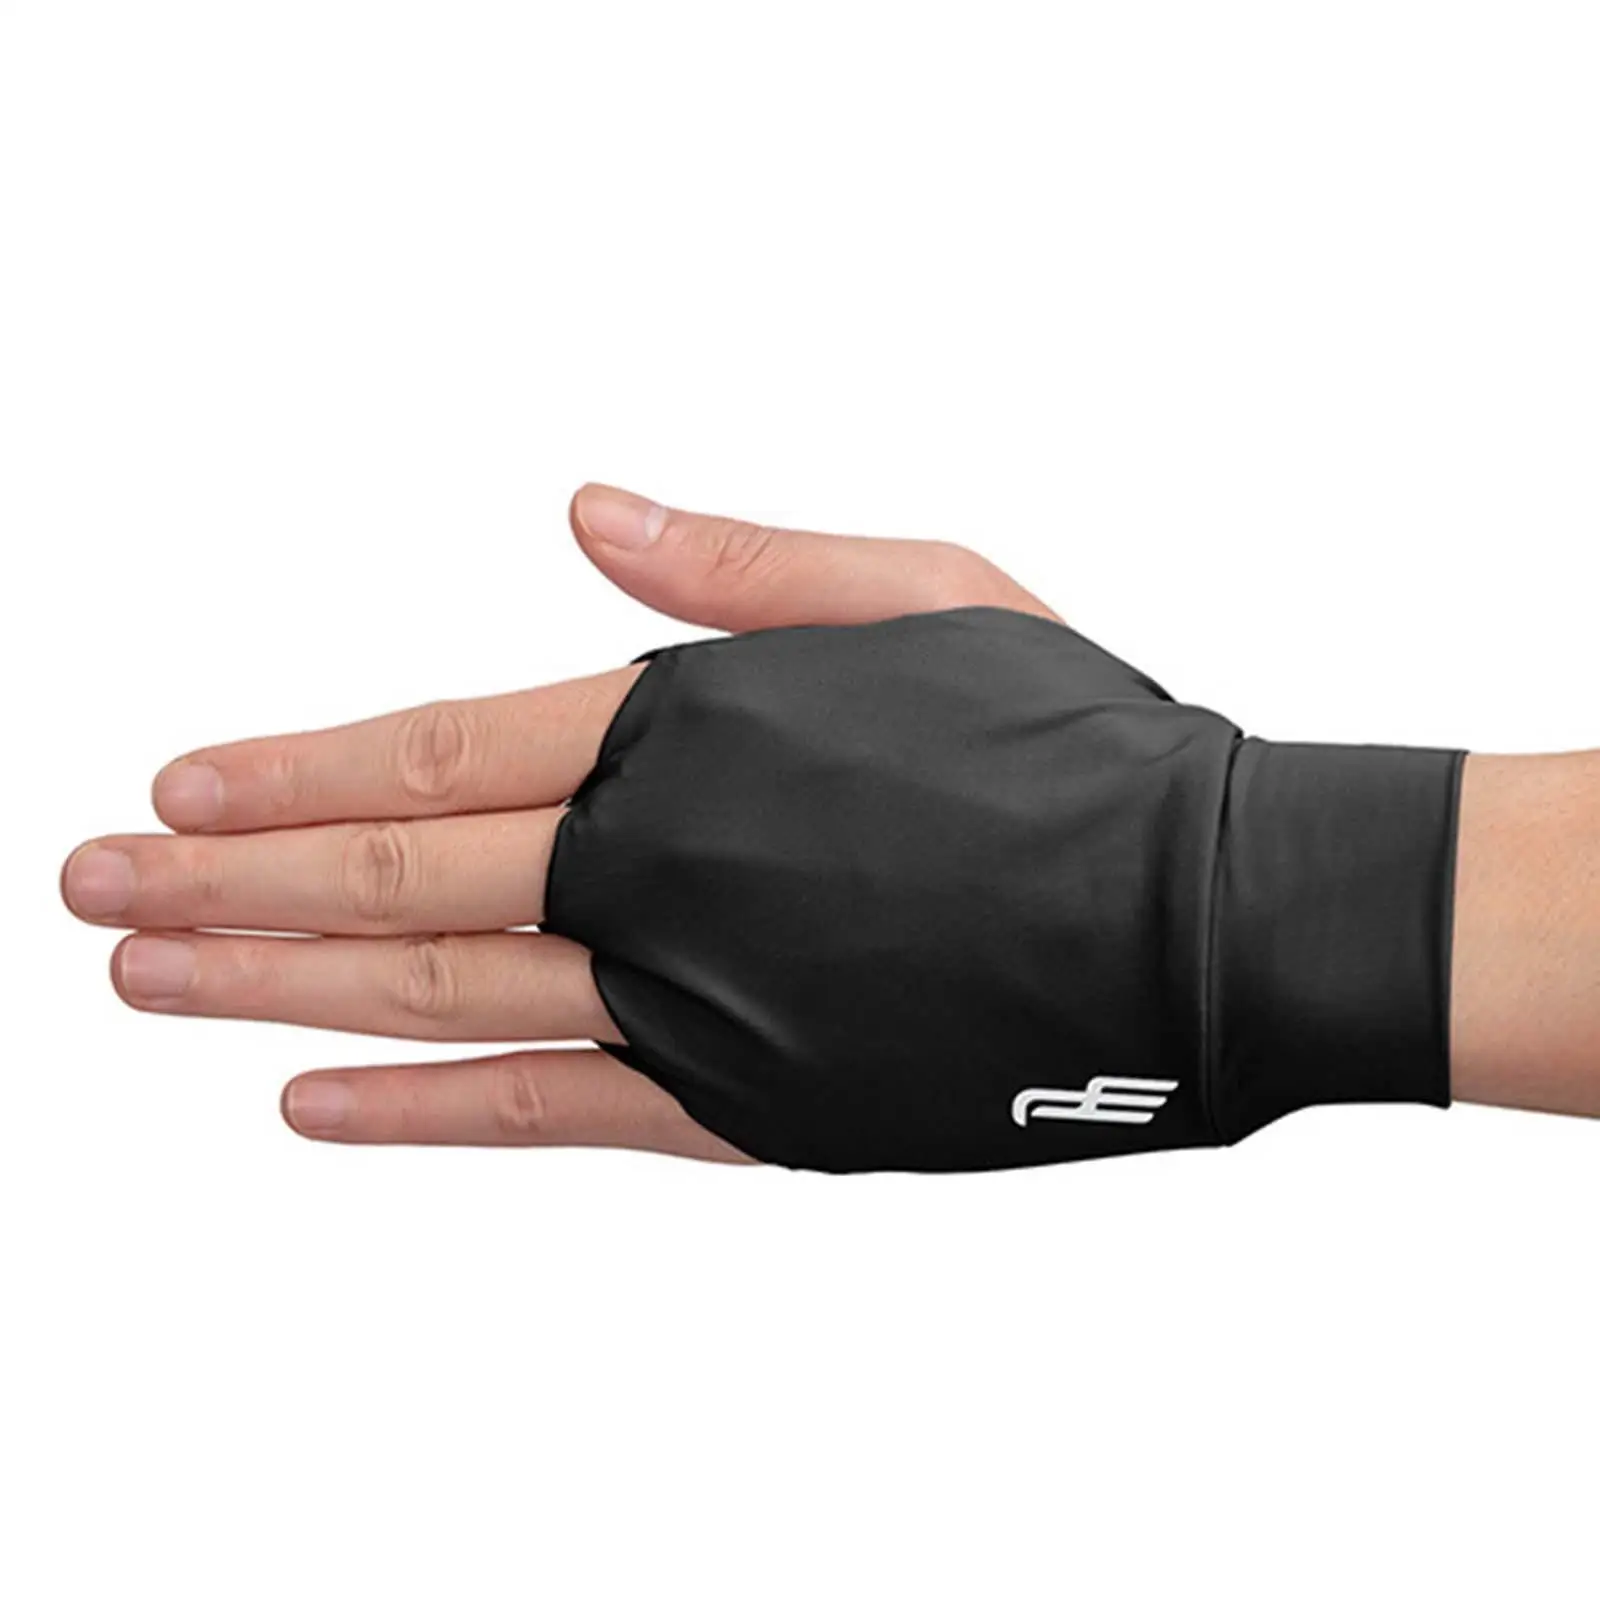 Summer Golf Half Finger Glove Ice Silk Material Comfortable Mesh Cooling Lining Accessory protector Practical Skin Friendly